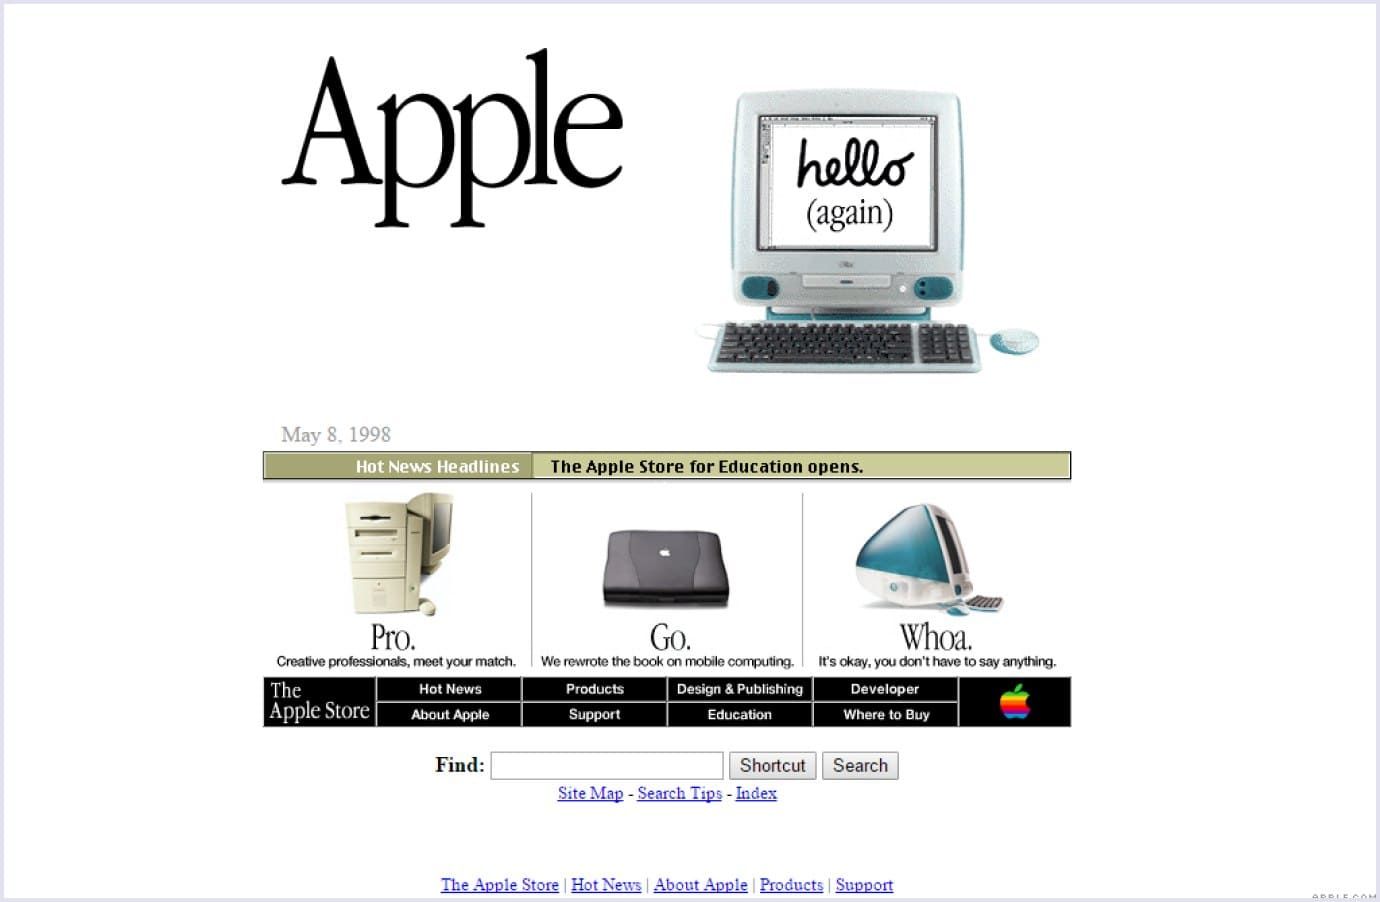 The early version of Apple's website design